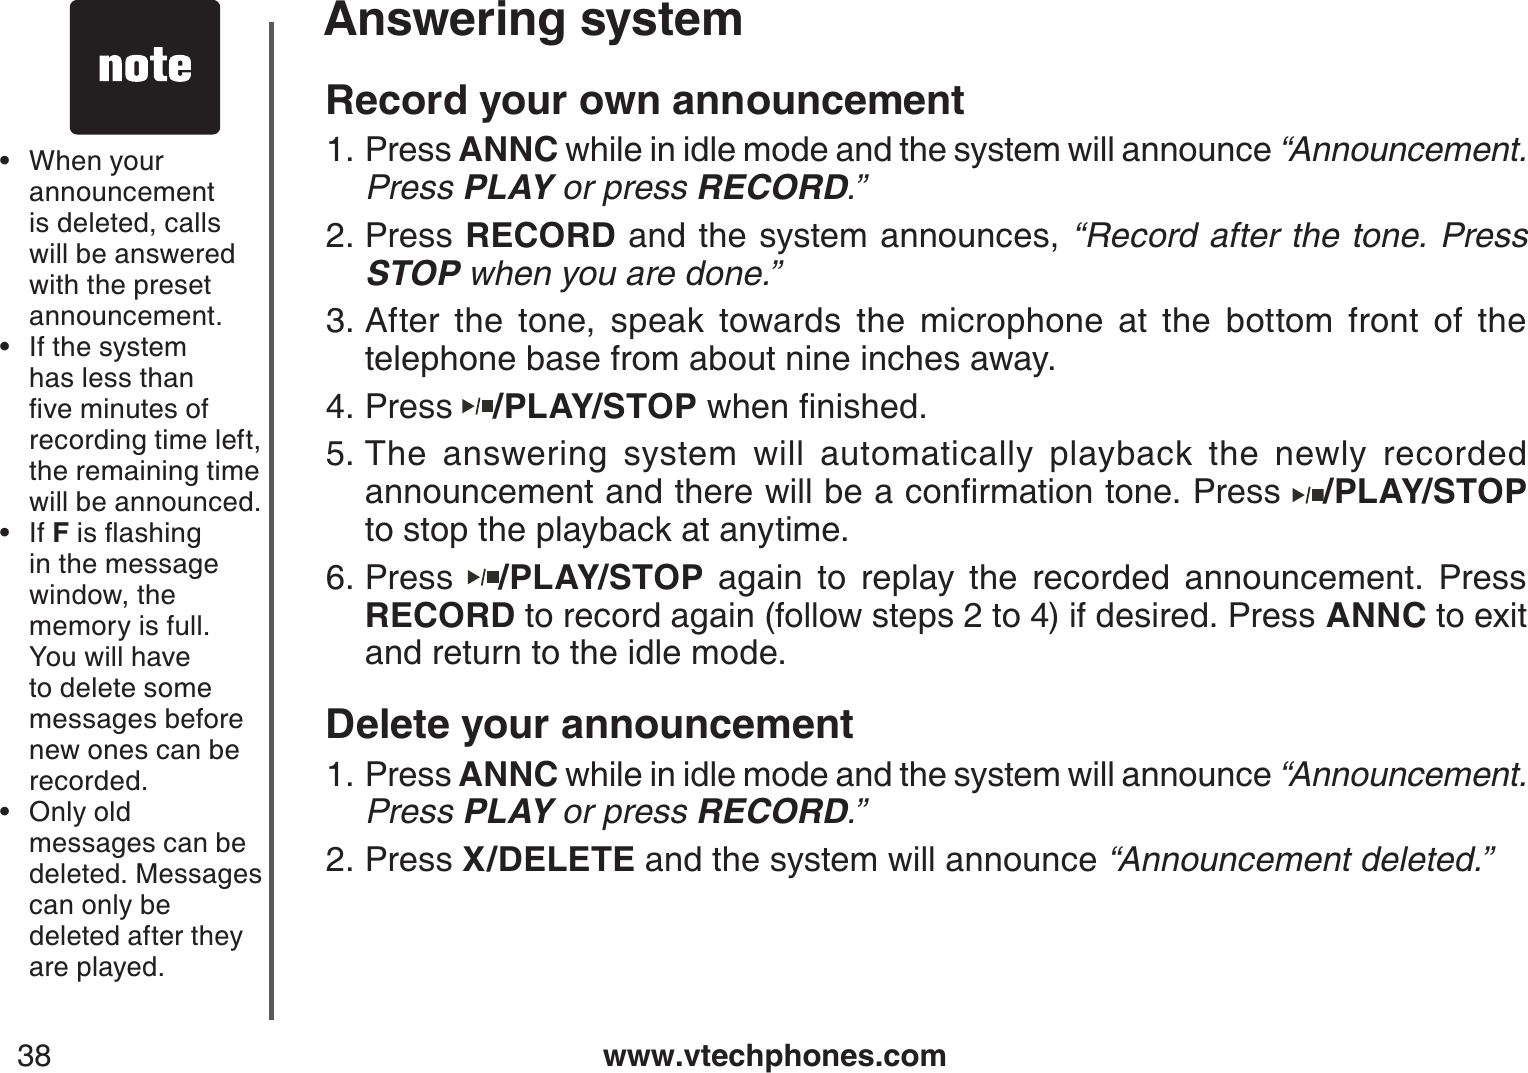 www.vtechphones.com38Answering systemRecord your own announcementPress ANNC while in idle mode and the system will announce “Announcement. Press PLAY or press RECORD.”Press RECORD and the system announces, “Record after the tone. Press STOP when you are done.”After the tone, speak towards the microphone at the bottom front of the telephone base from about nine inches away.Press  /PLAY/STOPYJGPſPKUJGFThe answering system will automatically playback the newly recorded CPPQWPEGOGPVCPFVJGTGYKNNDGCEQPſTOCVKQPVQPG2TGUU /PLAY/STOPto stop the playback at anytime.Press  /PLAY/STOP again to replay the recorded announcement. Press RECORD to record again (follow steps 2 to 4) if desired. Press ANNC to exitand return to the idle mode.Delete your announcementPress ANNC while in idle mode and the system will announce “Announcement. Press PLAY or press RECORD.”Press X/DELETE and the system will announce “Announcement deleted.”1.2.3.4.5.6.1.2.When your announcement is deleted, calls will be answered with the preset announcement.If the system has less than ſXGOKPWVGUQHrecording time left, the remaining time will be announced.If FKUƀCUJKPIin the message window, the memory is full. You will have to delete some messages before new ones can be recorded.Only old messages can be deleted. Messages can only be deleted after they are played.••••